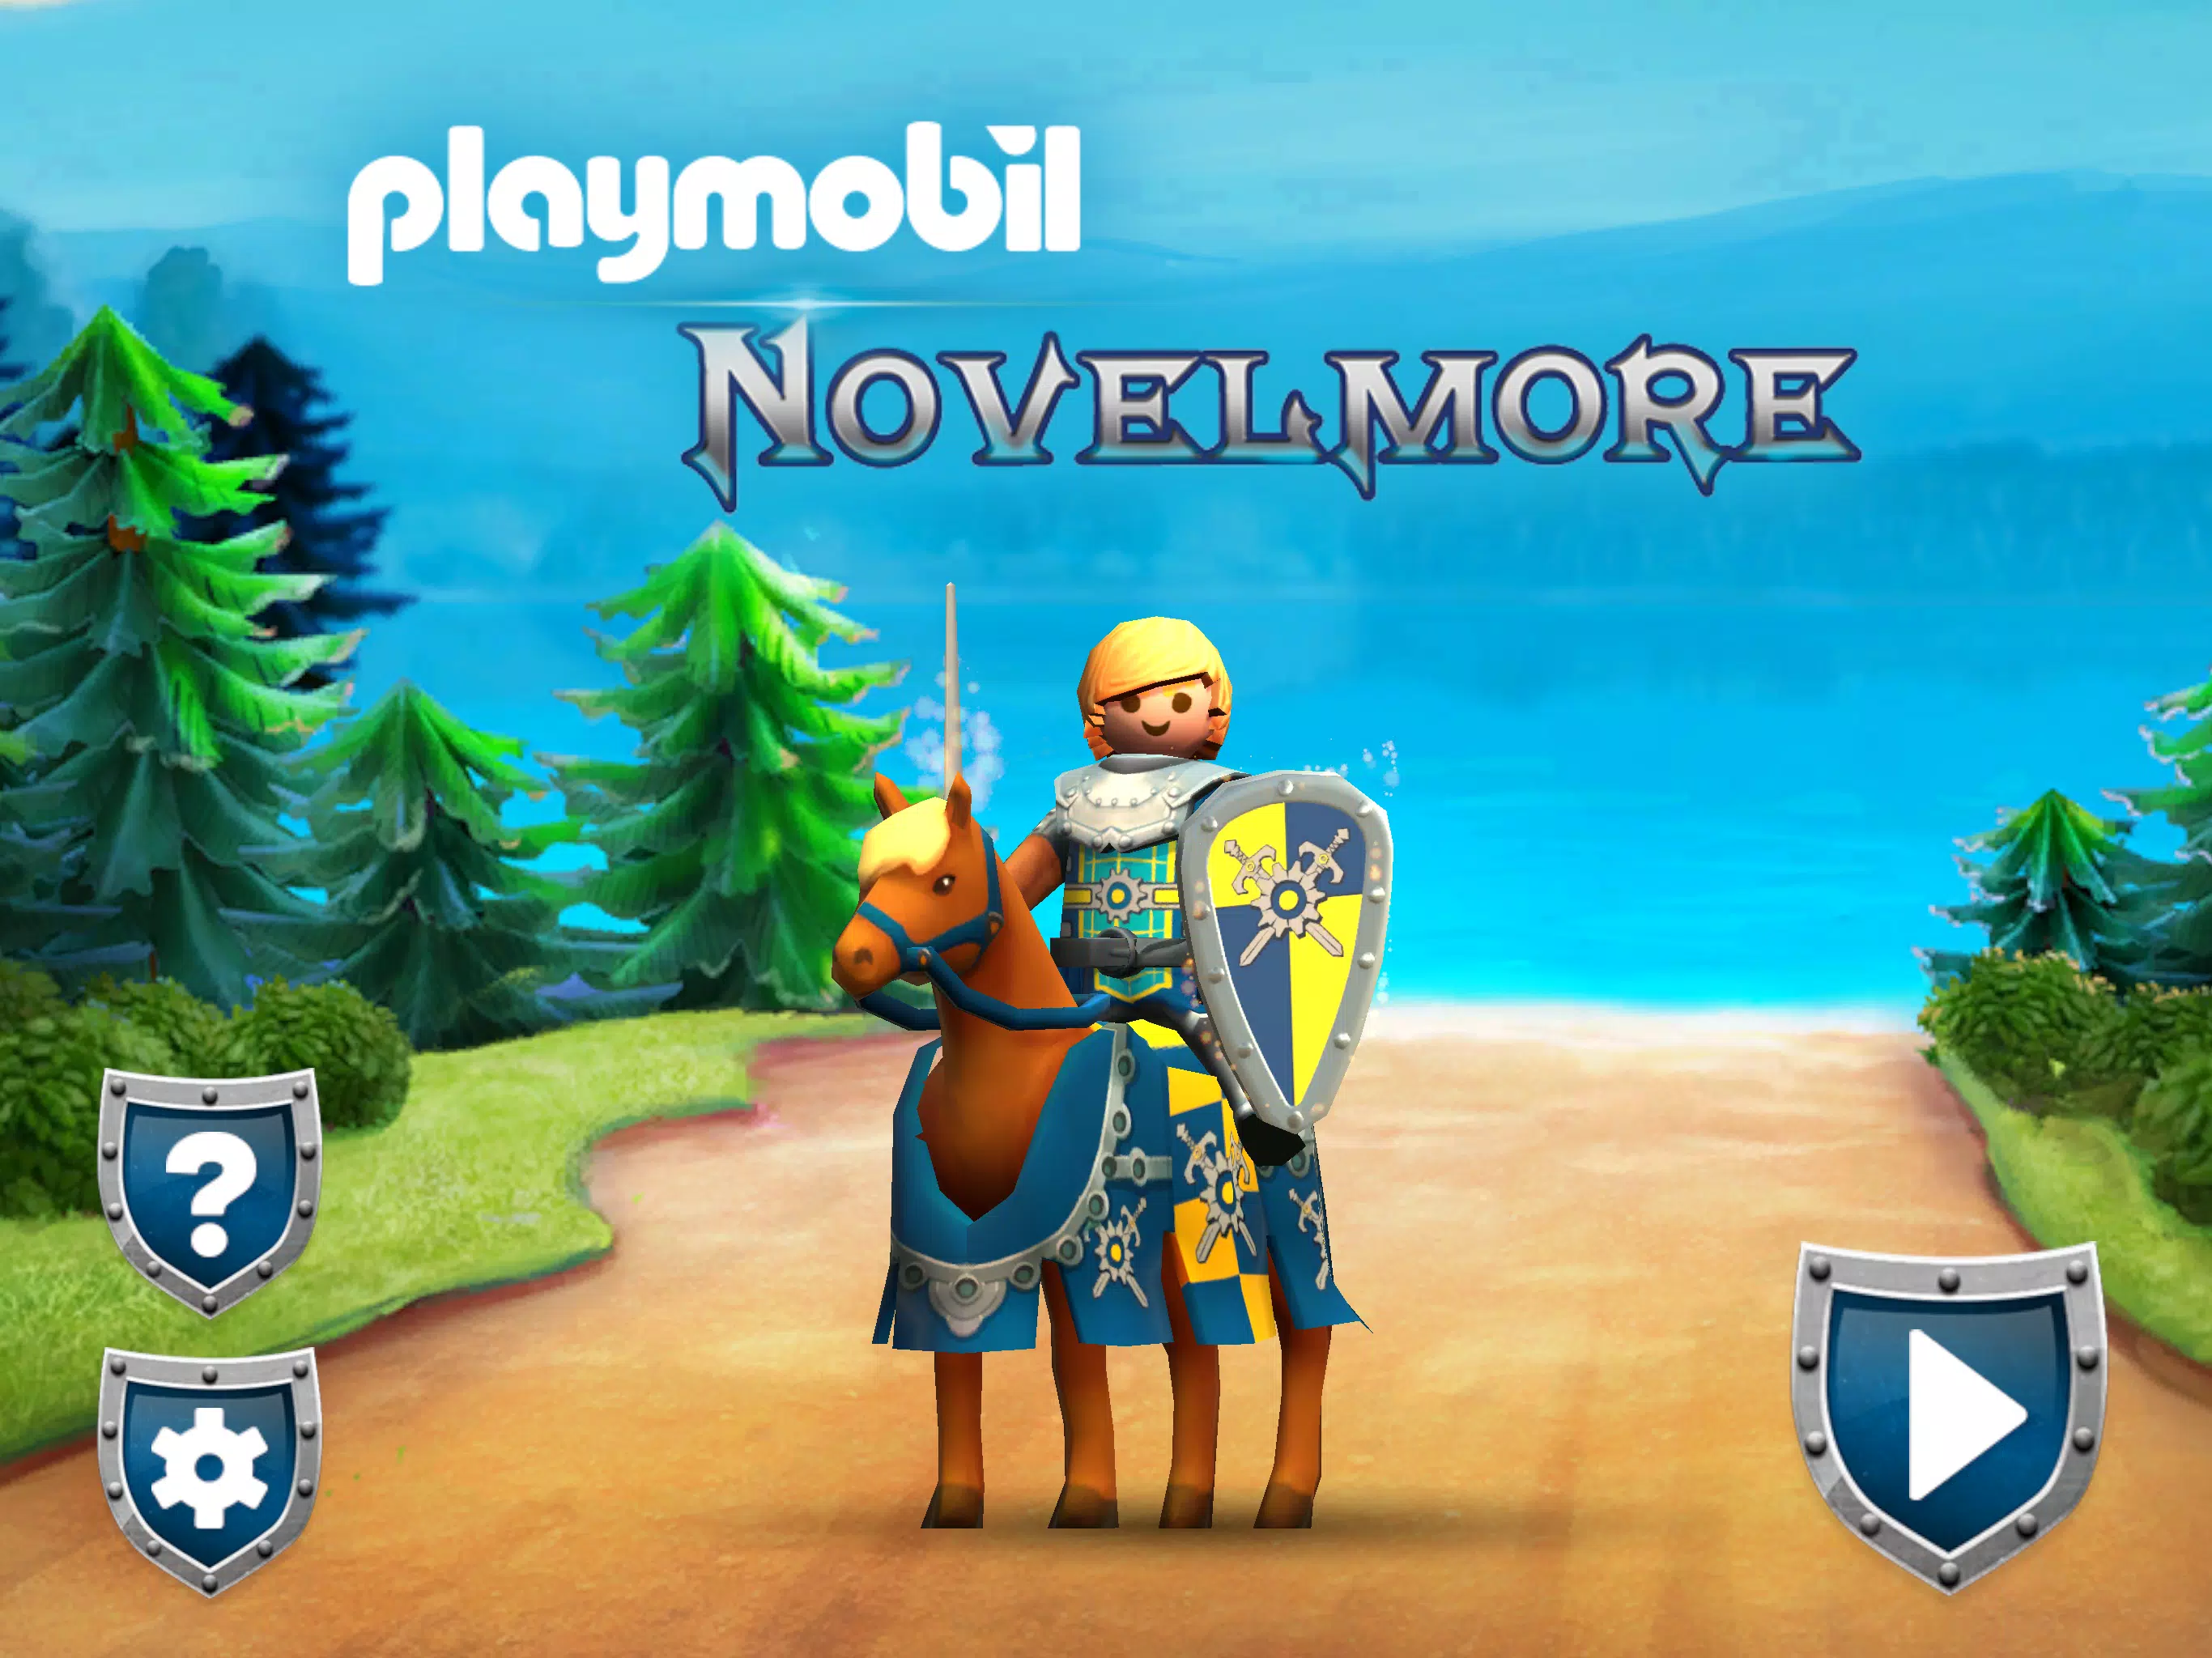 PLAYMOBIL Novelmore for Android - APK Download